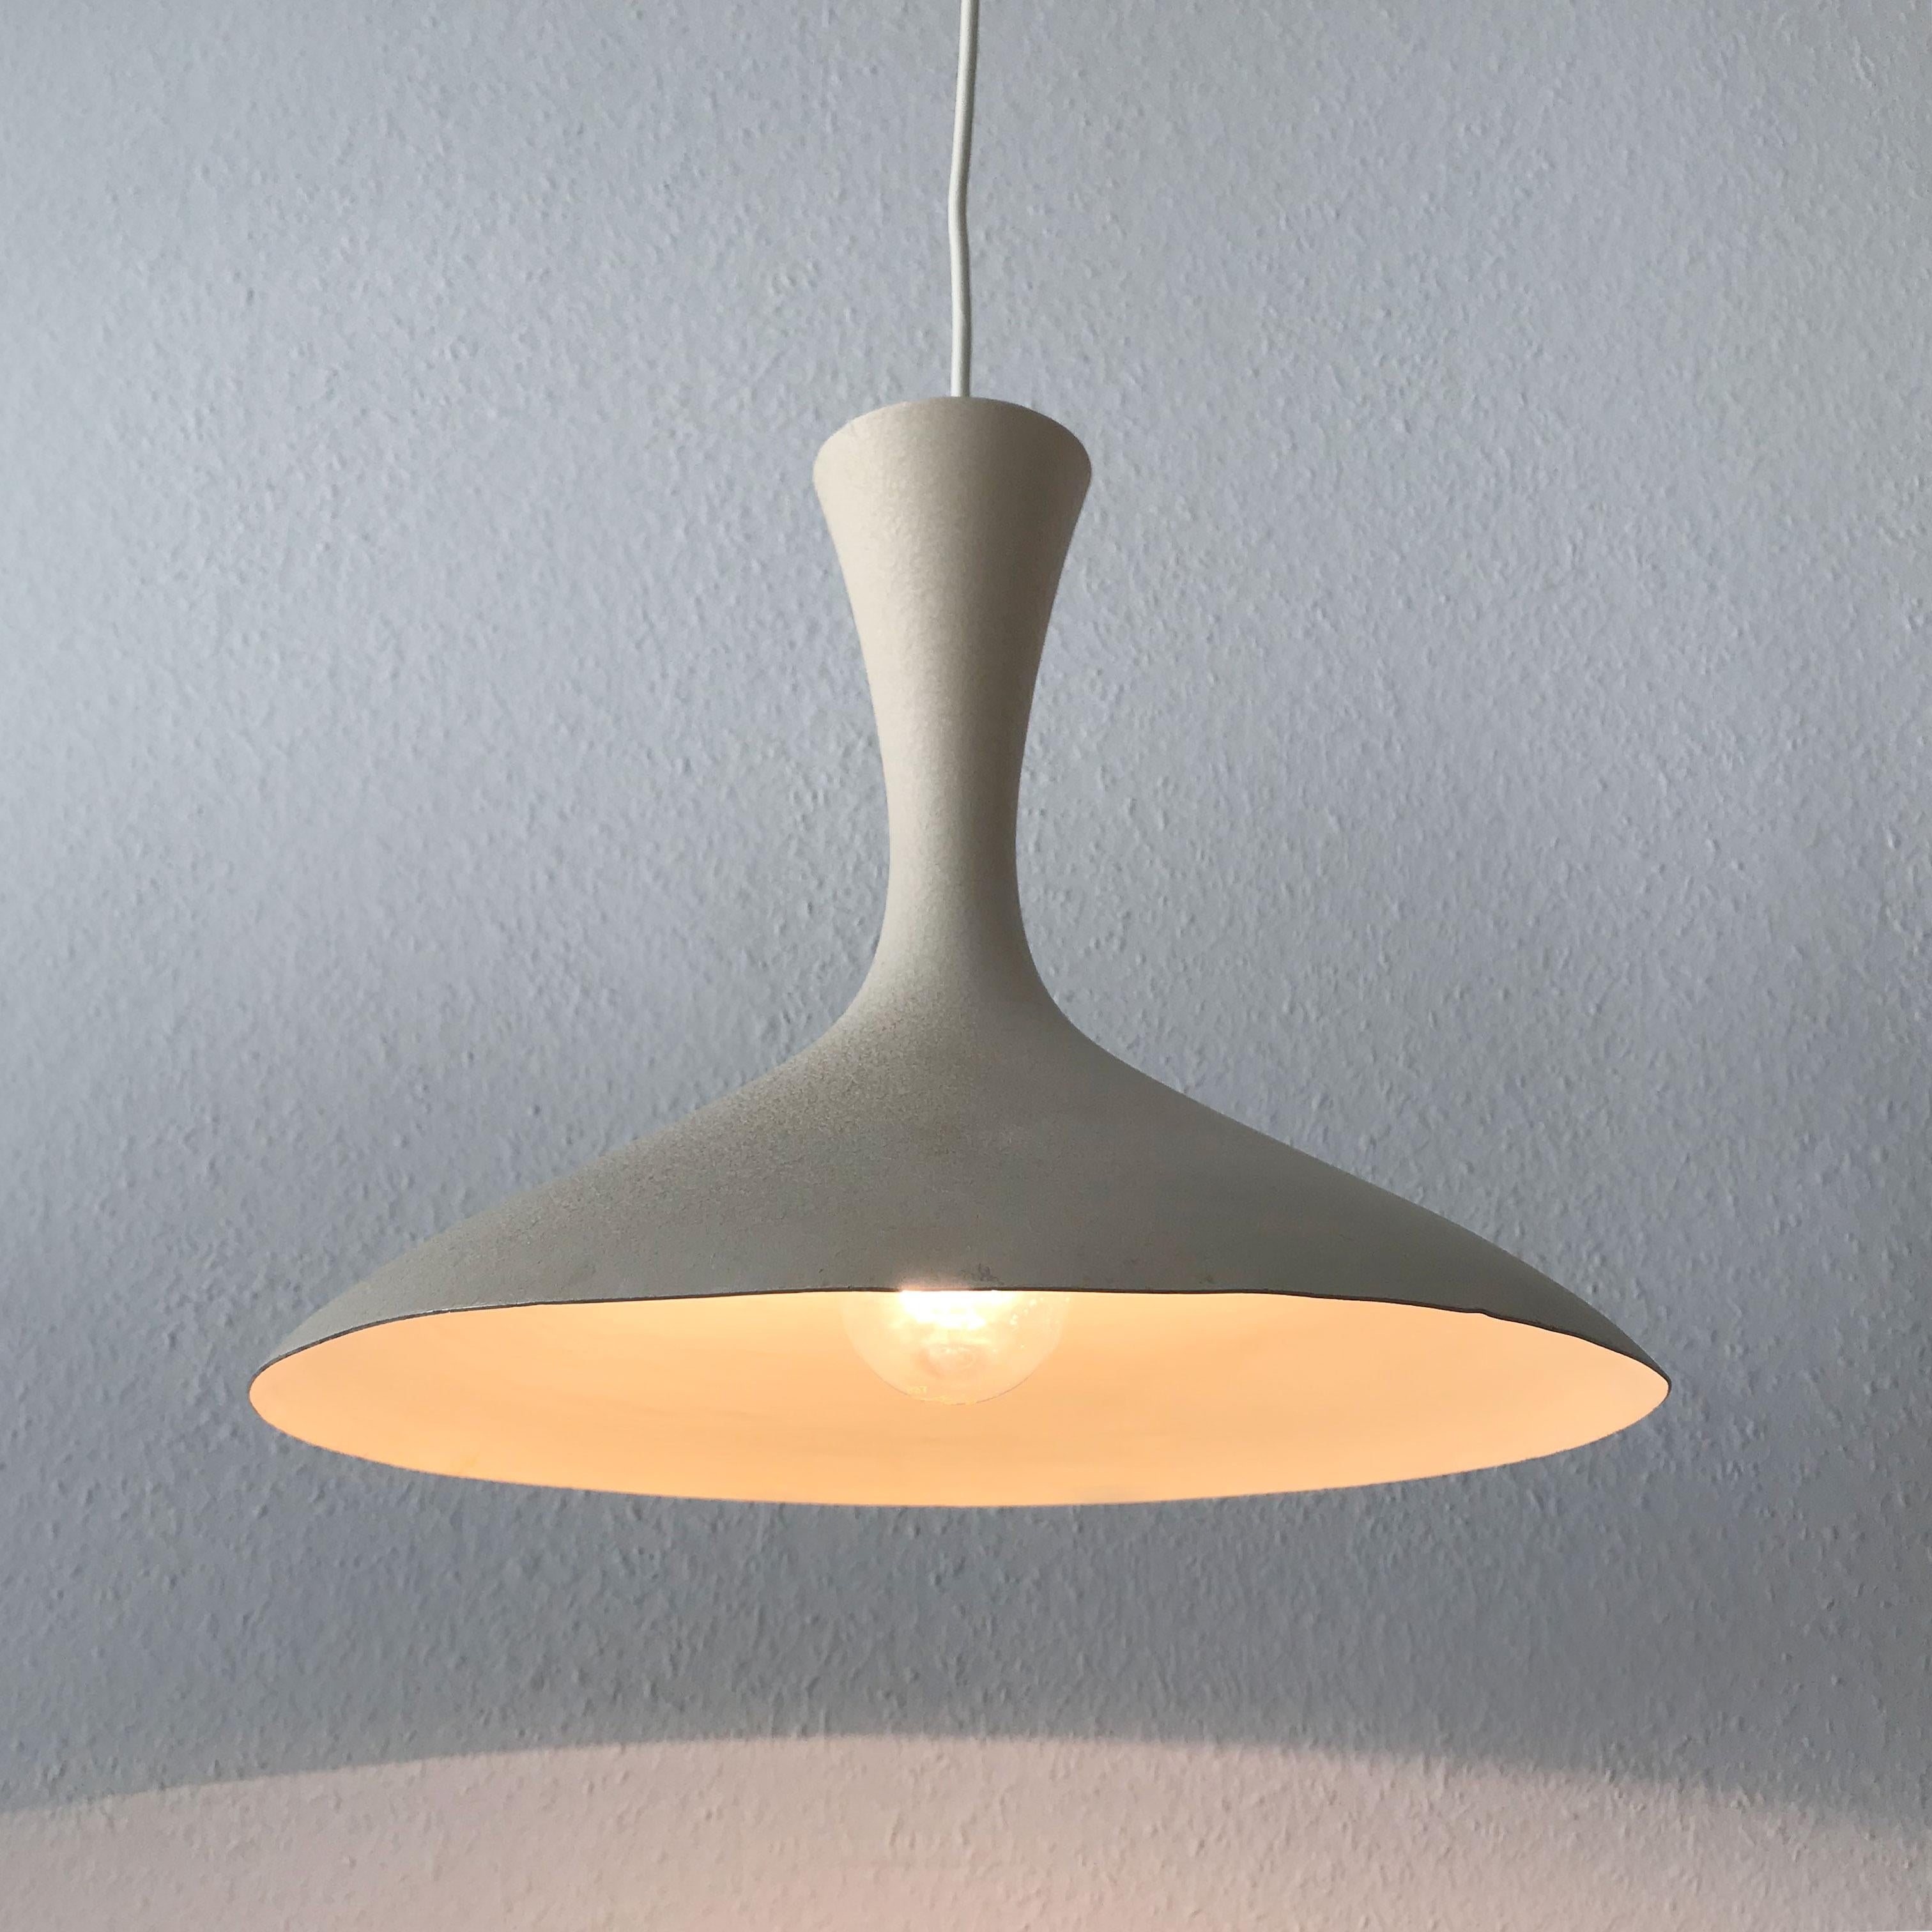 Extremely rare and elegant Mid-Century Modern pendant lamp. Designed by Louis Kalff for Gebrüder Cosack, 1950s, Germany.
This elegant pendant lamp is executed in crème-white lacquered aluminium and extremely rare.
It is executed with 1 x E27 screw